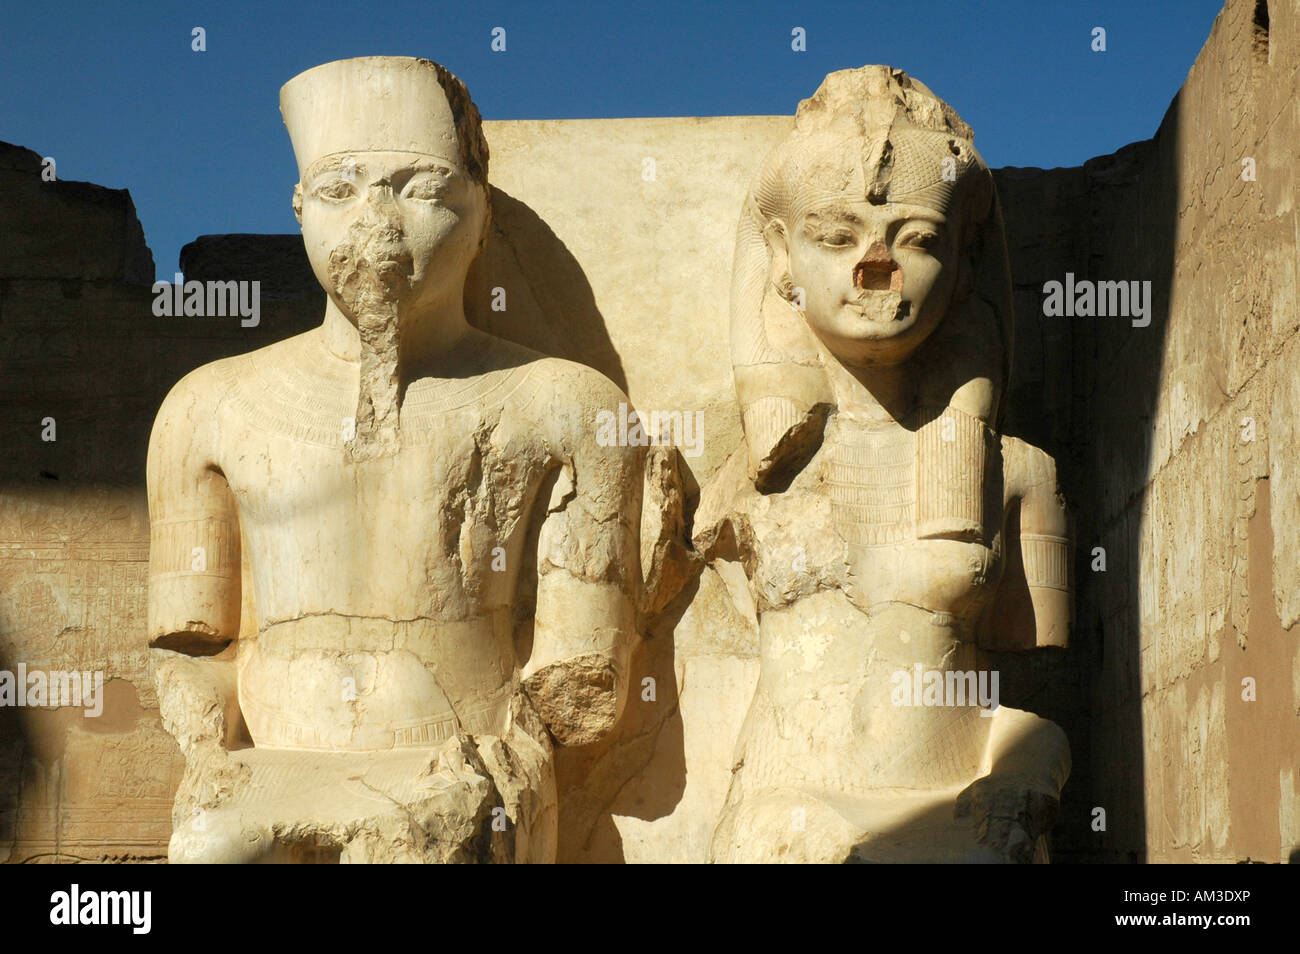 Pharao statues, temple site, Luxor, Egypt, Africa Stock Photo